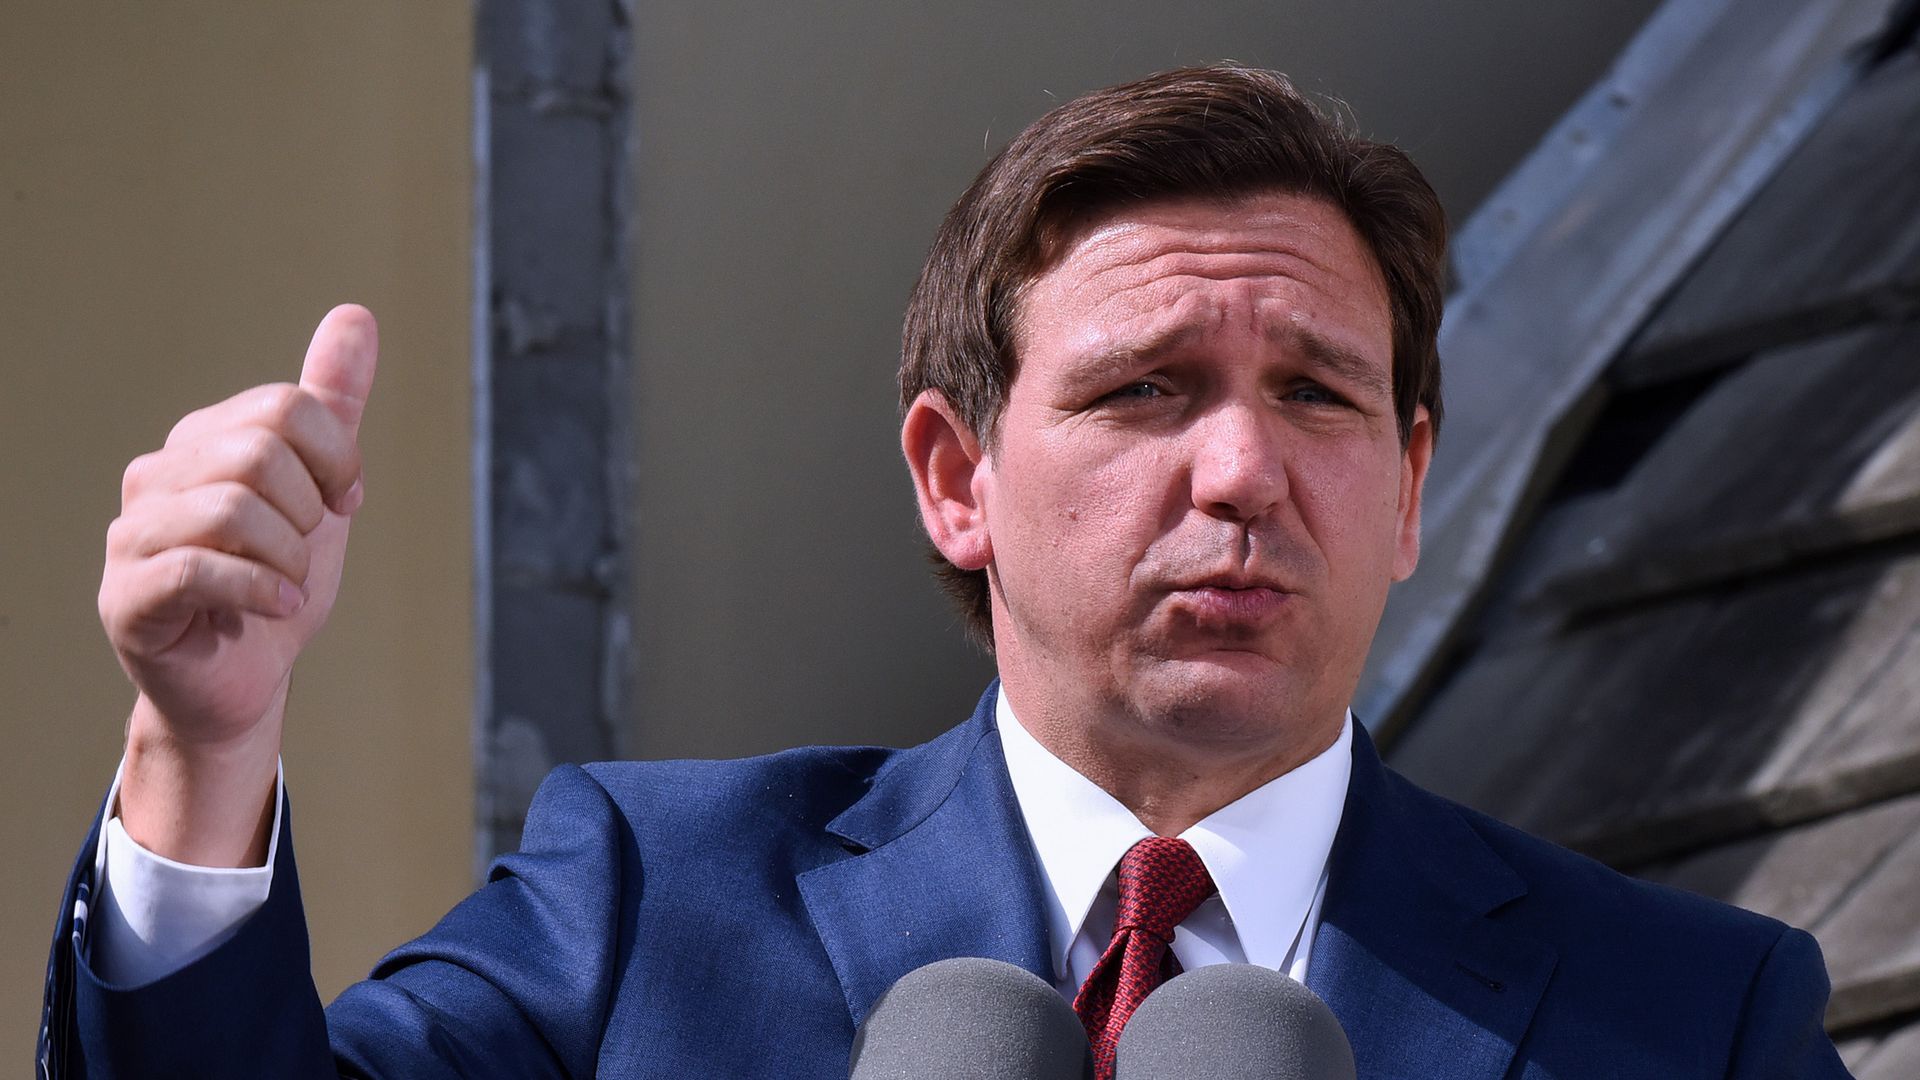 lorida Gov. Ron DeSantis speaks at a press conference to announce the award of $100 million for beach recovery following Hurricanes Ian and Nicole in Daytona Beach Shores in Florida.